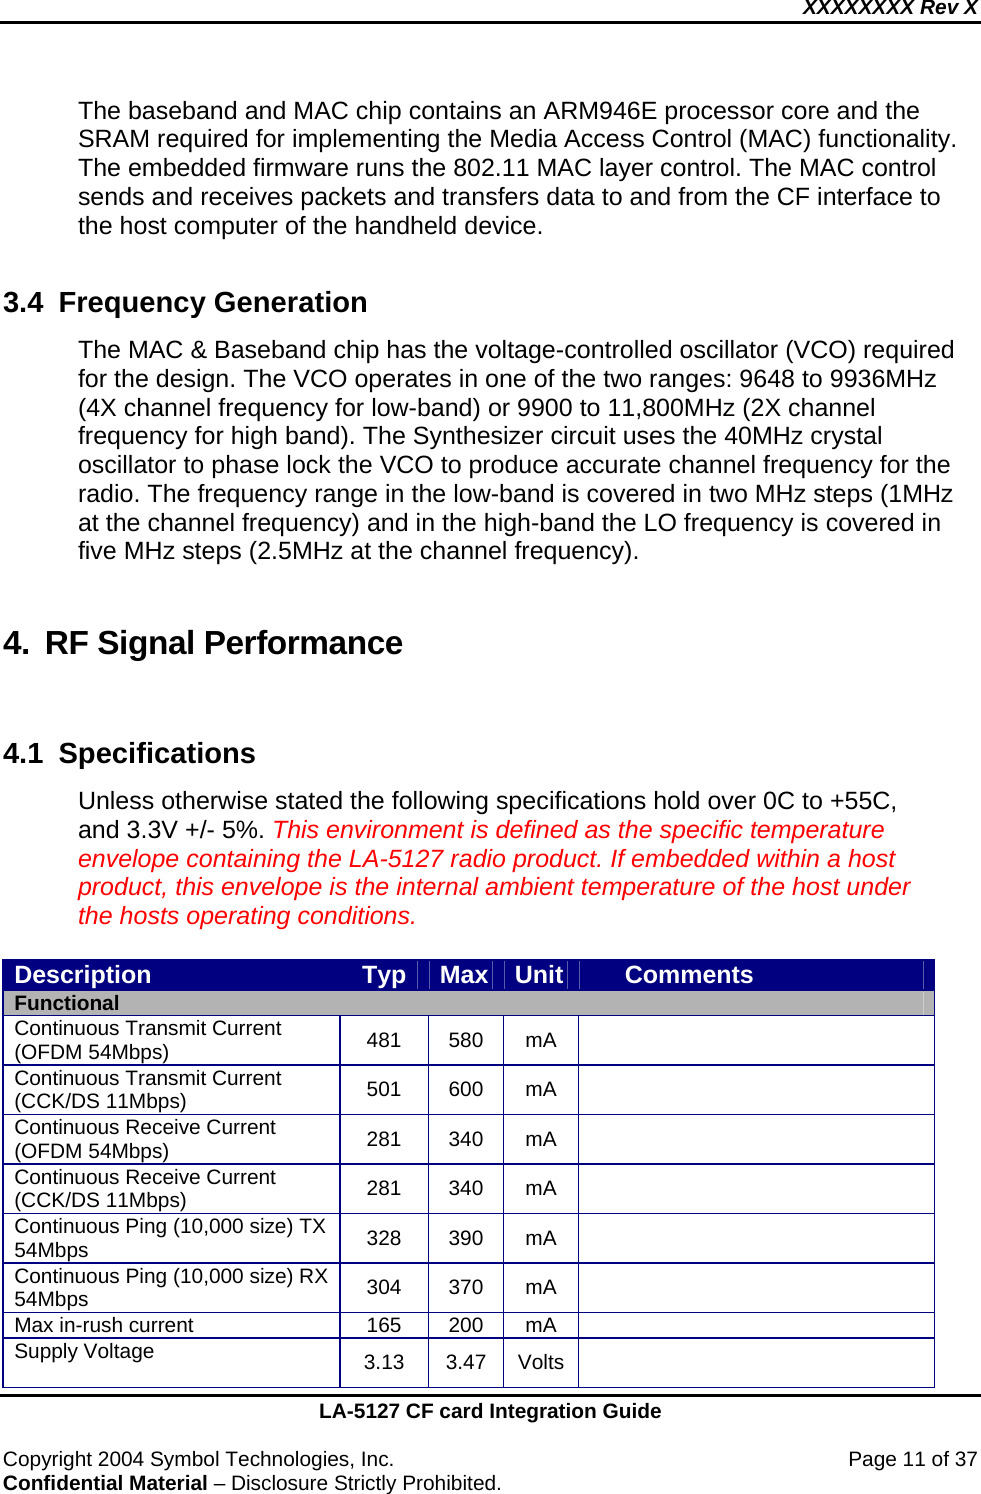 XXXXXXXX Rev X    LA-5127 CF card Integration Guide  Copyright 2004 Symbol Technologies, Inc.    Page 11 of 37 Confidential Material – Disclosure Strictly Prohibited. The baseband and MAC chip contains an ARM946E processor core and the SRAM required for implementing the Media Access Control (MAC) functionality. The embedded firmware runs the 802.11 MAC layer control. The MAC control sends and receives packets and transfers data to and from the CF interface to the host computer of the handheld device.  3.4 Frequency Generation  The MAC &amp; Baseband chip has the voltage-controlled oscillator (VCO) required for the design. The VCO operates in one of the two ranges: 9648 to 9936MHz (4X channel frequency for low-band) or 9900 to 11,800MHz (2X channel frequency for high band). The Synthesizer circuit uses the 40MHz crystal oscillator to phase lock the VCO to produce accurate channel frequency for the radio. The frequency range in the low-band is covered in two MHz steps (1MHz at the channel frequency) and in the high-band the LO frequency is covered in five MHz steps (2.5MHz at the channel frequency).  4. RF Signal Performance  4.1 Specifications  Unless otherwise stated the following specifications hold over 0C to +55C, and 3.3V +/- 5%. This environment is defined as the specific temperature envelope containing the LA-5127 radio product. If embedded within a host product, this envelope is the internal ambient temperature of the host under the hosts operating conditions.    Description  Typ  Max  Unit       Comments Functional Continuous Transmit Current (OFDM 54Mbps)  481 580 mA  Continuous Transmit Current (CCK/DS 11Mbps)  501 600 mA  Continuous Receive Current (OFDM 54Mbps)  281 340 mA  Continuous Receive Current (CCK/DS 11Mbps)  281 340 mA  Continuous Ping (10,000 size) TX 54Mbps  328 390 mA  Continuous Ping (10,000 size) RX 54Mbps  304 370 mA  Max in-rush current  165  200  mA   Supply Voltage  3.13 3.47 Volts  